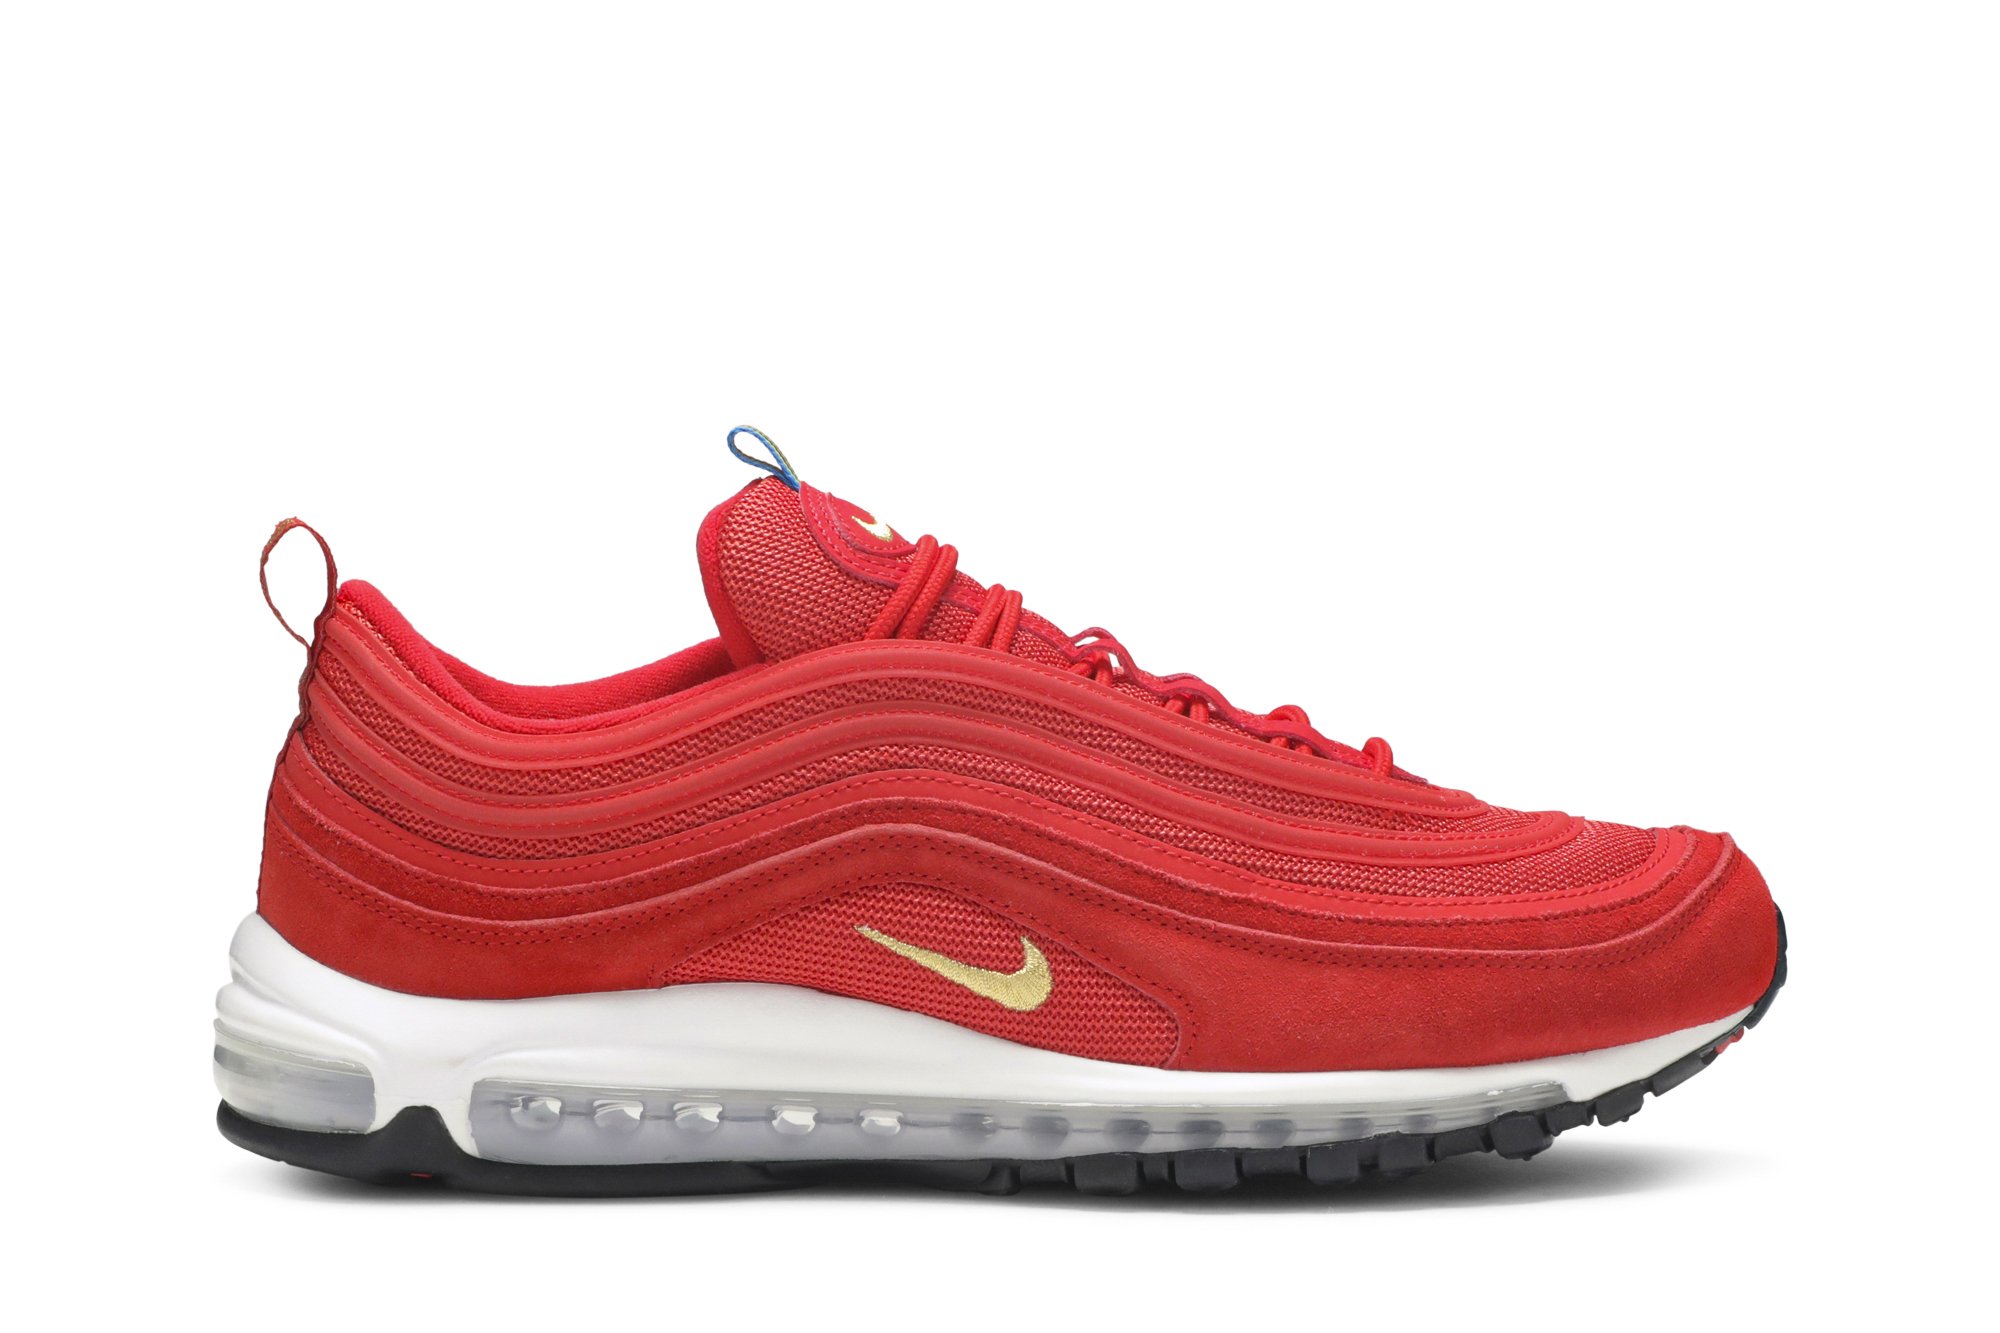 Buy Air Max 97 QS 'Olympic Rings - Red' - CI3708 600 | GOAT